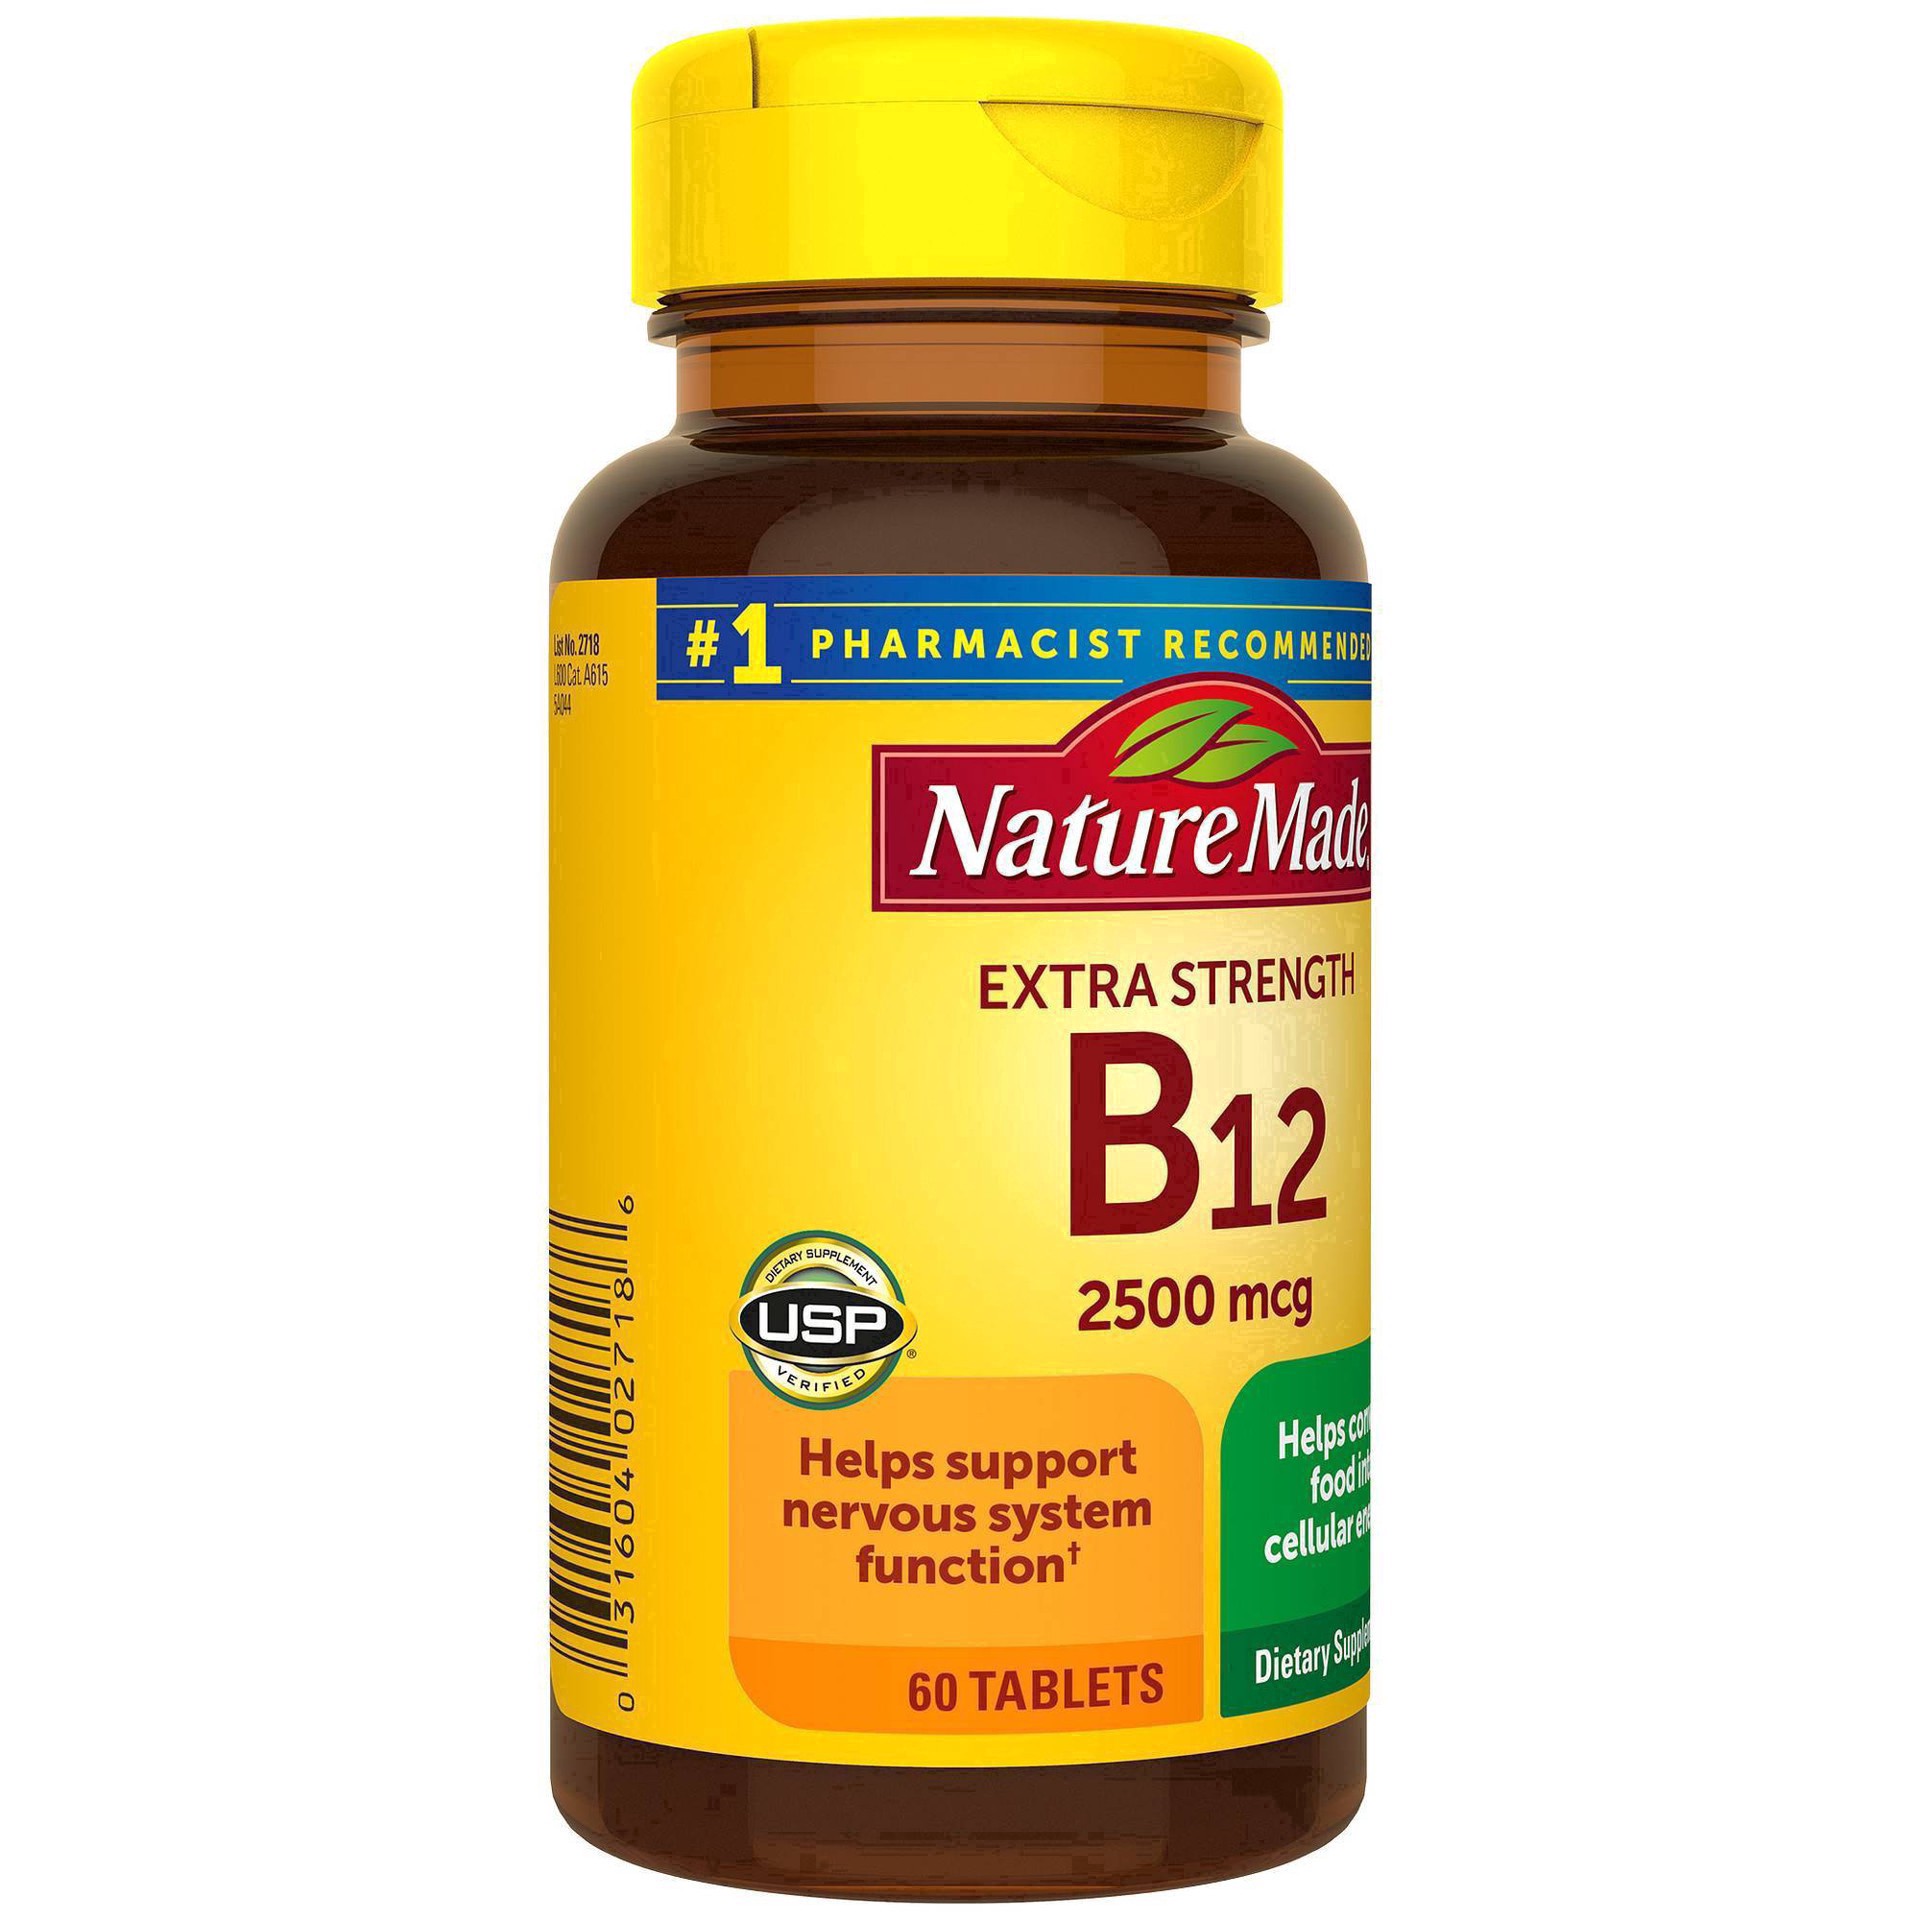 slide 33 of 60, Nature Made Extra Strength Vitamin B12 2500 mcg Tablets for Energy Metabolism Support - 60ct, 60 ct